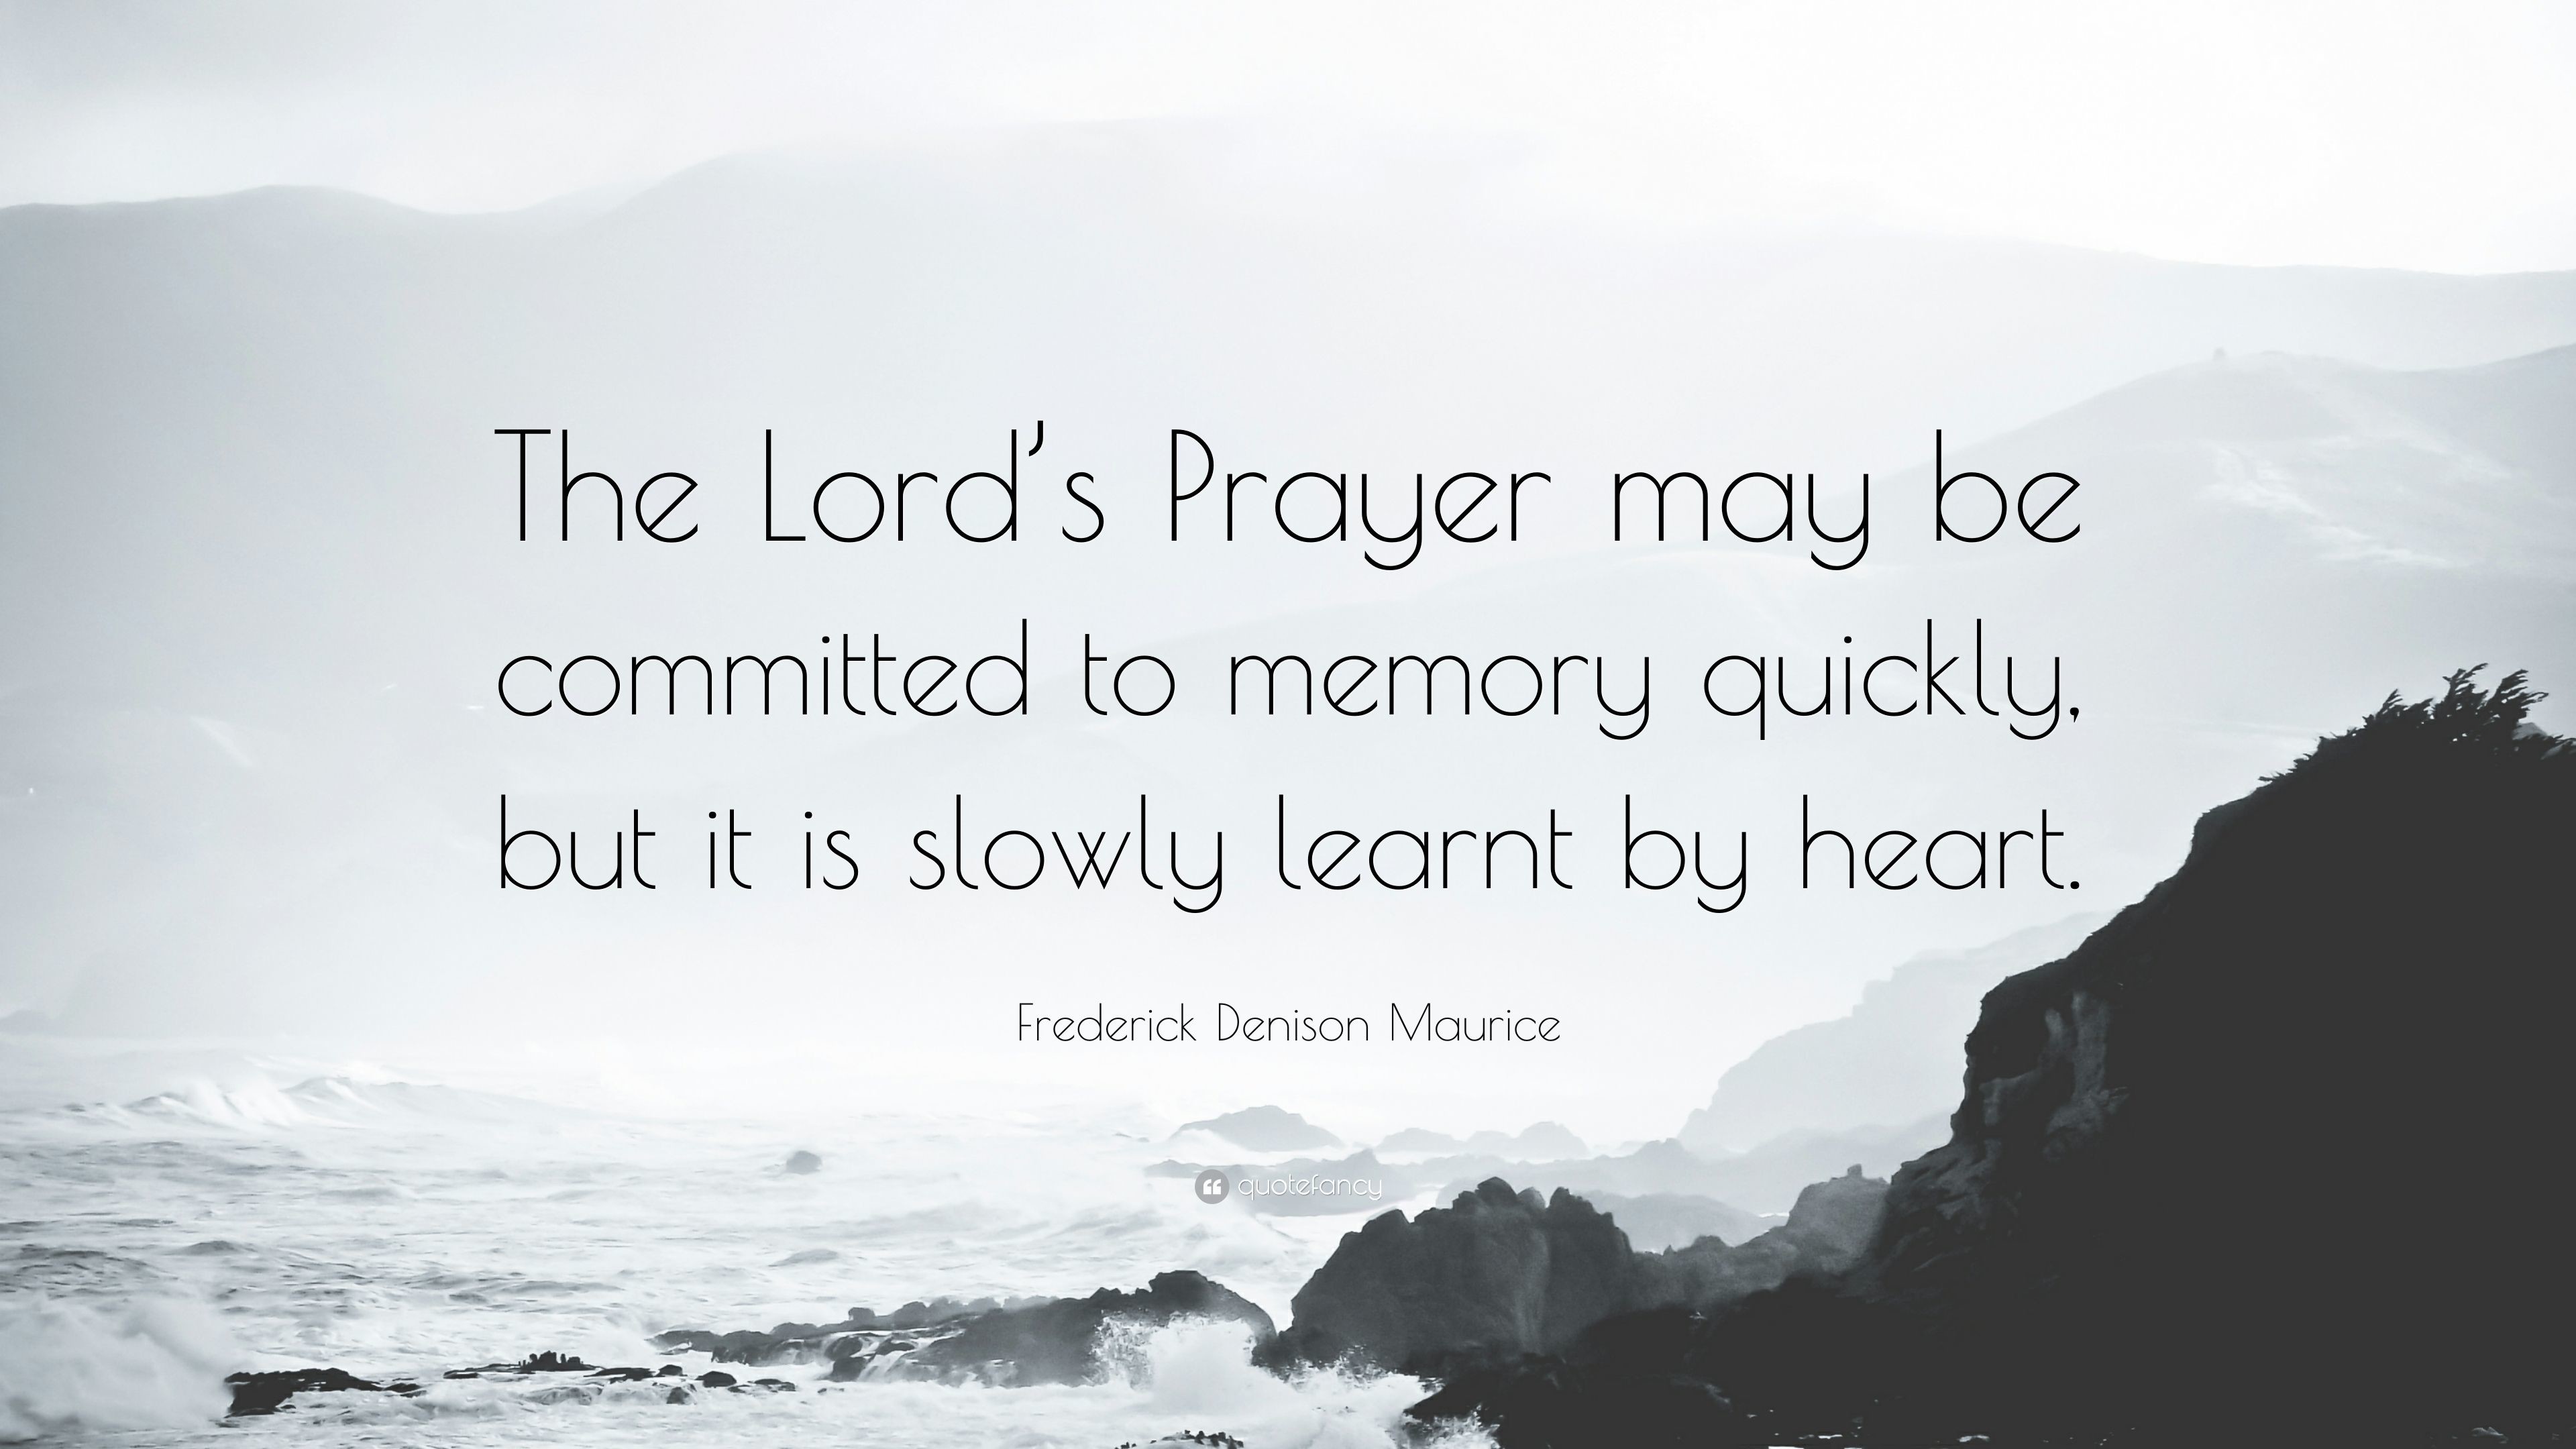 3840x2160 Frederick Denison Maurice Quote: “The Lord's Prayer may be committed to  memory quickly,